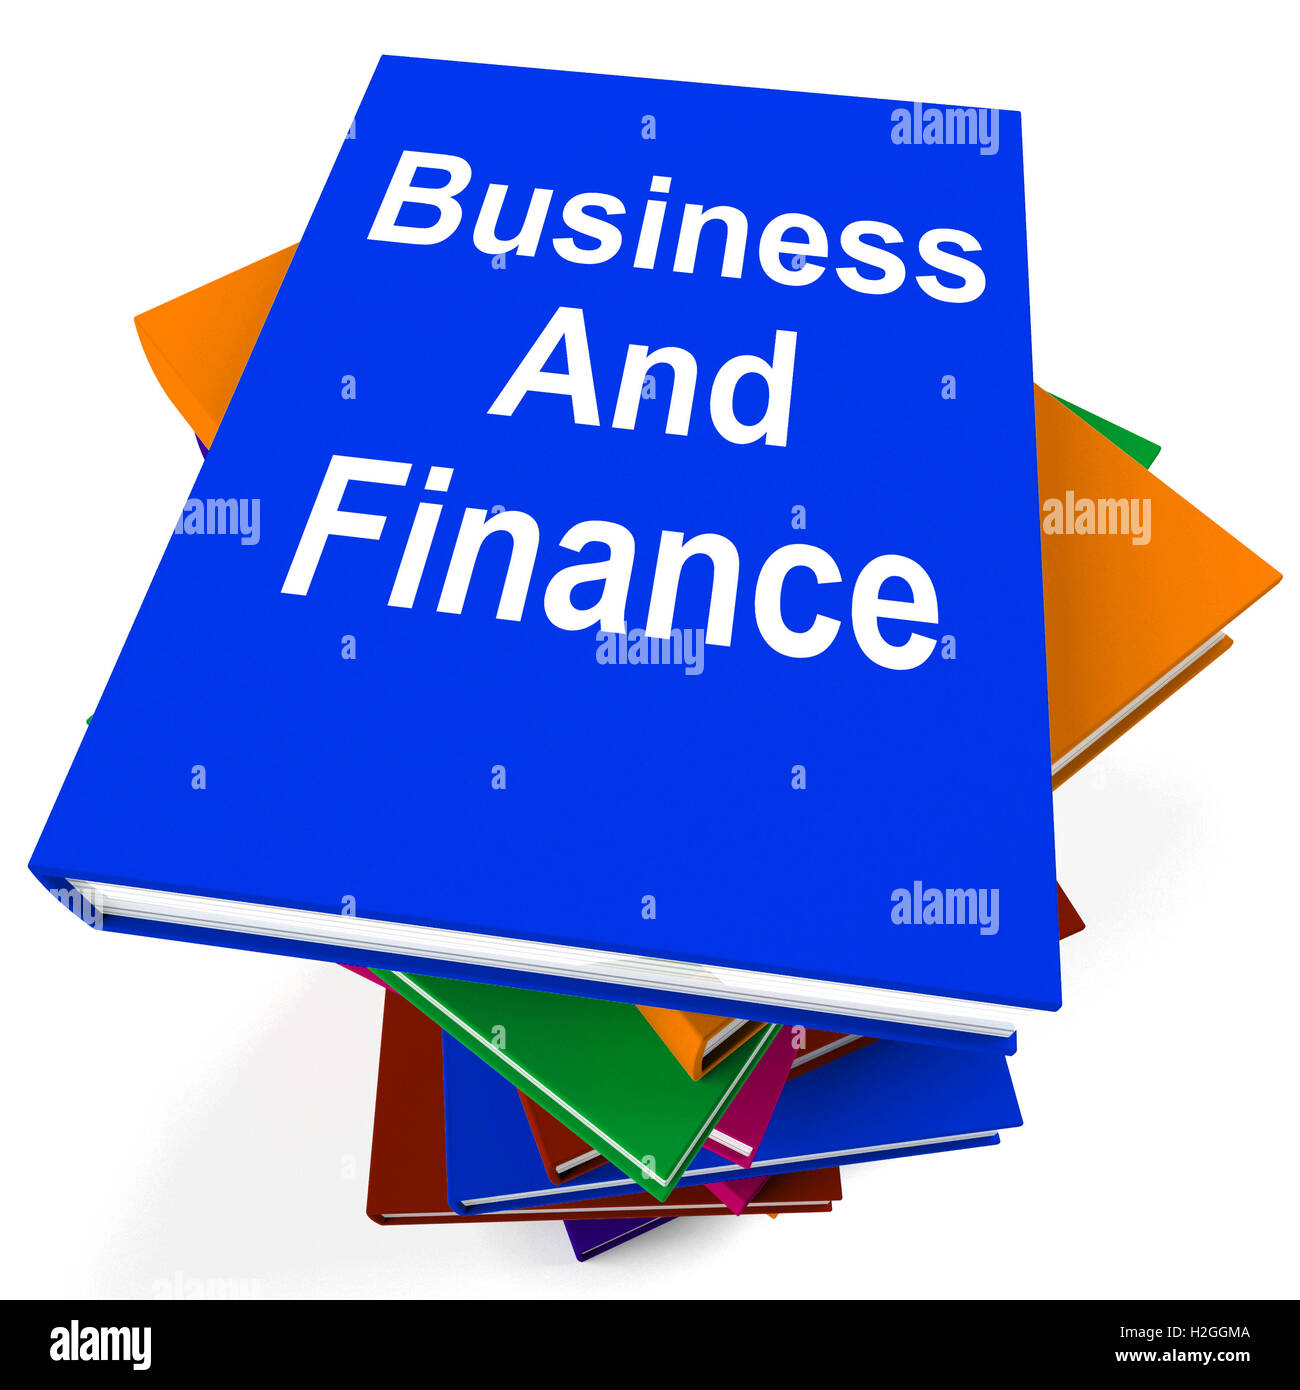 Business And Finance Book Stack Shows Businesses Finances Stock Photo